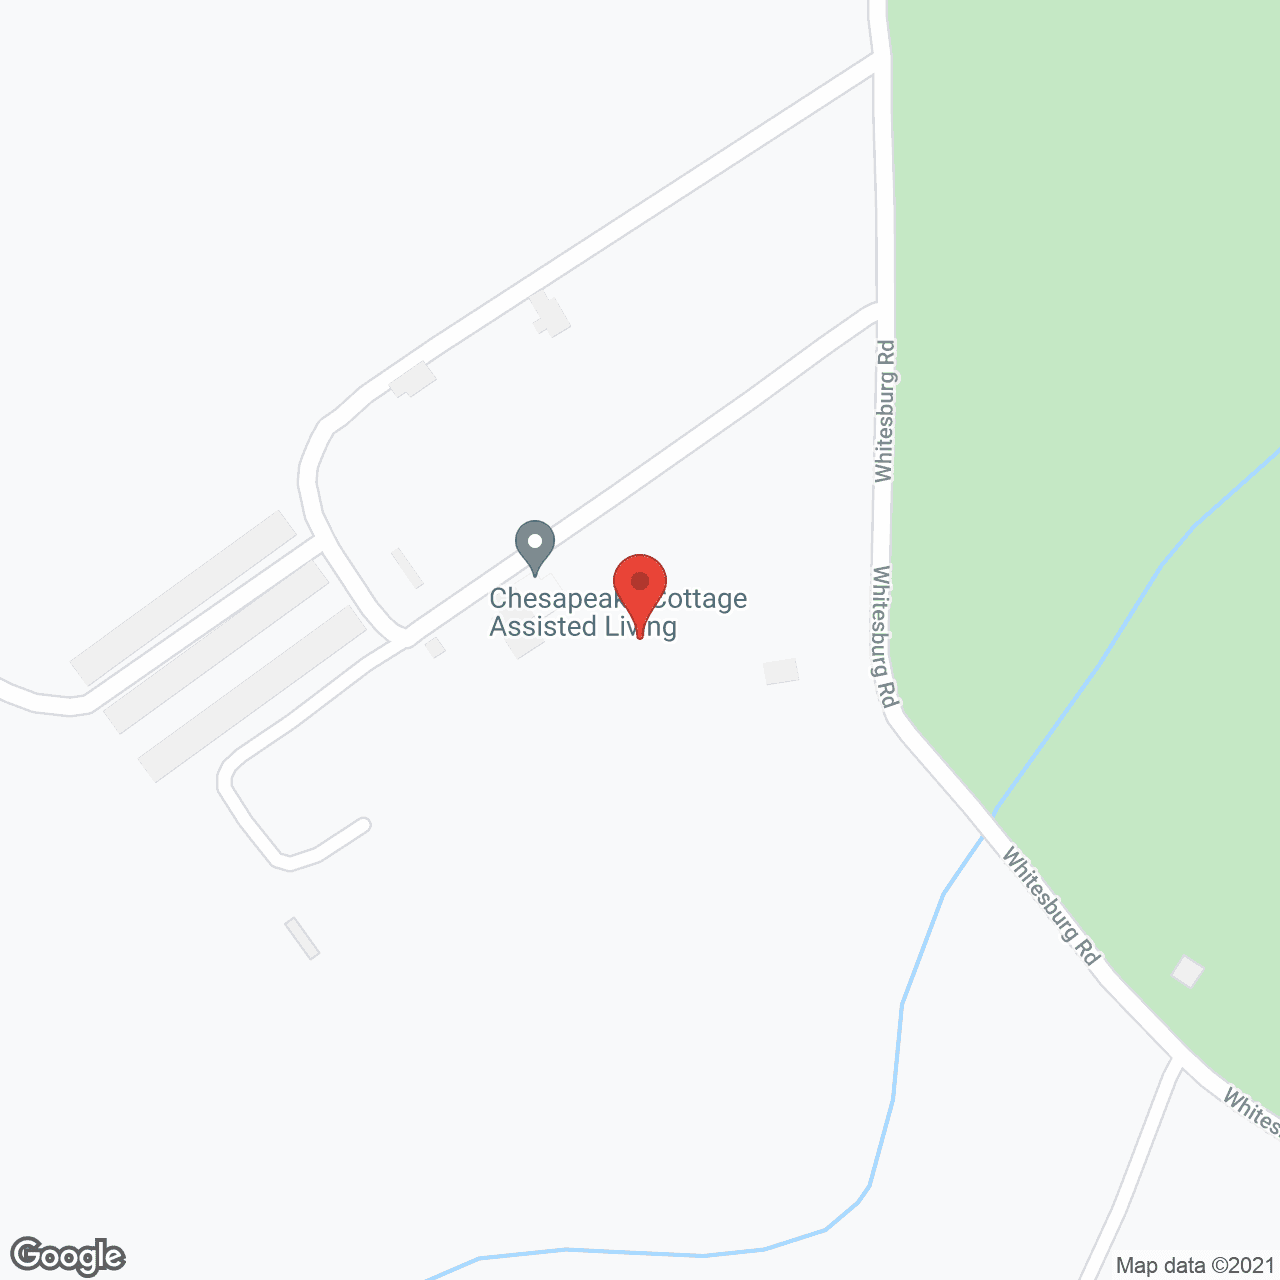 Chesapeake Cottage Assisted Living in google map